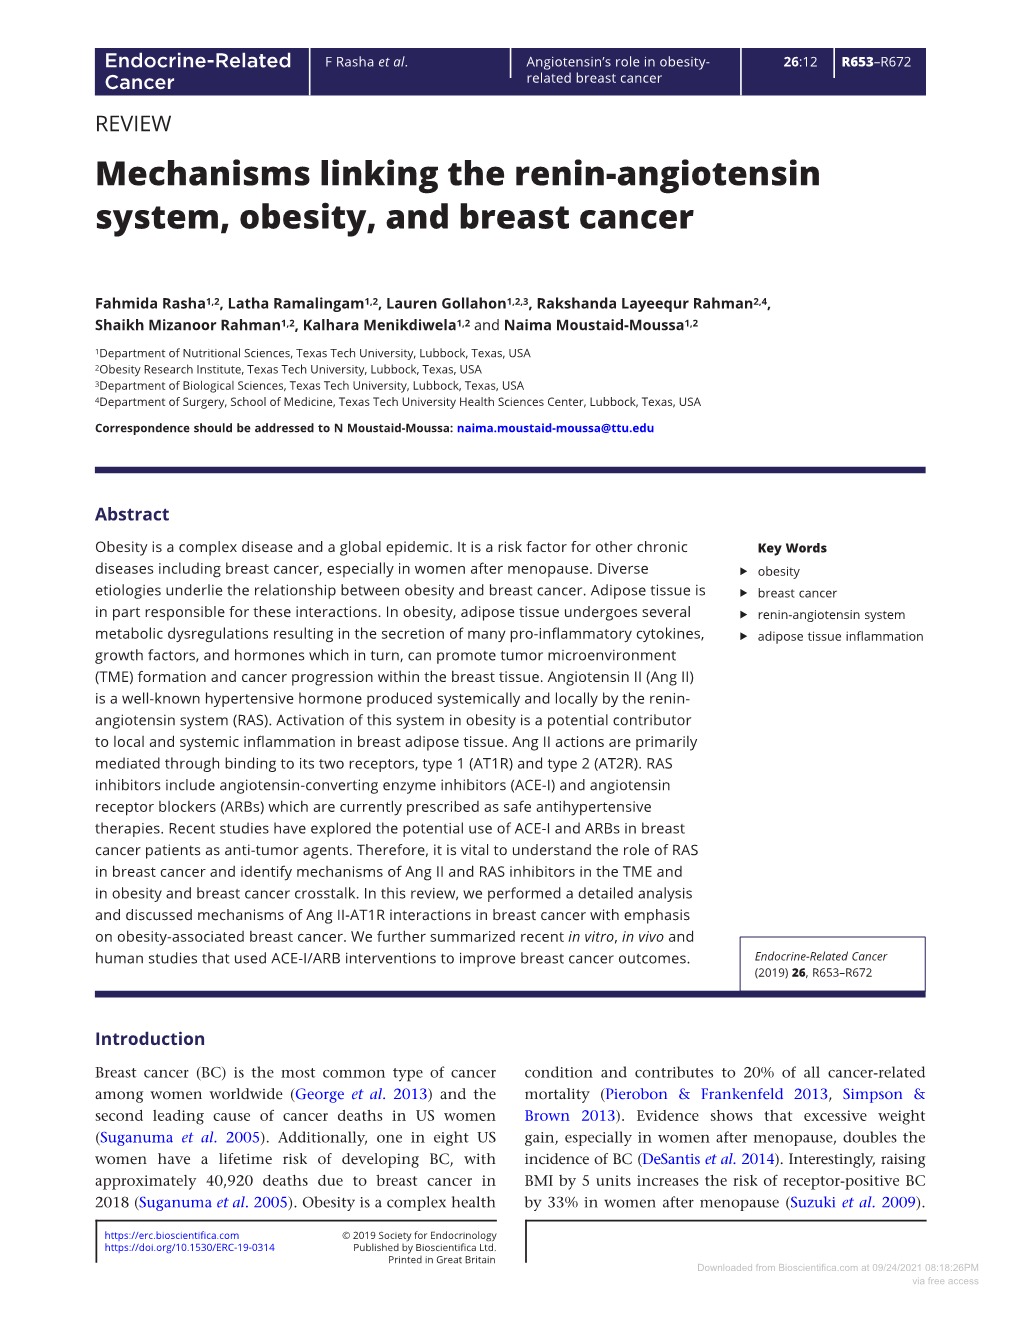 Mechanisms Linking the Renin-Angiotensin System, Obesity, and Breast Cancer